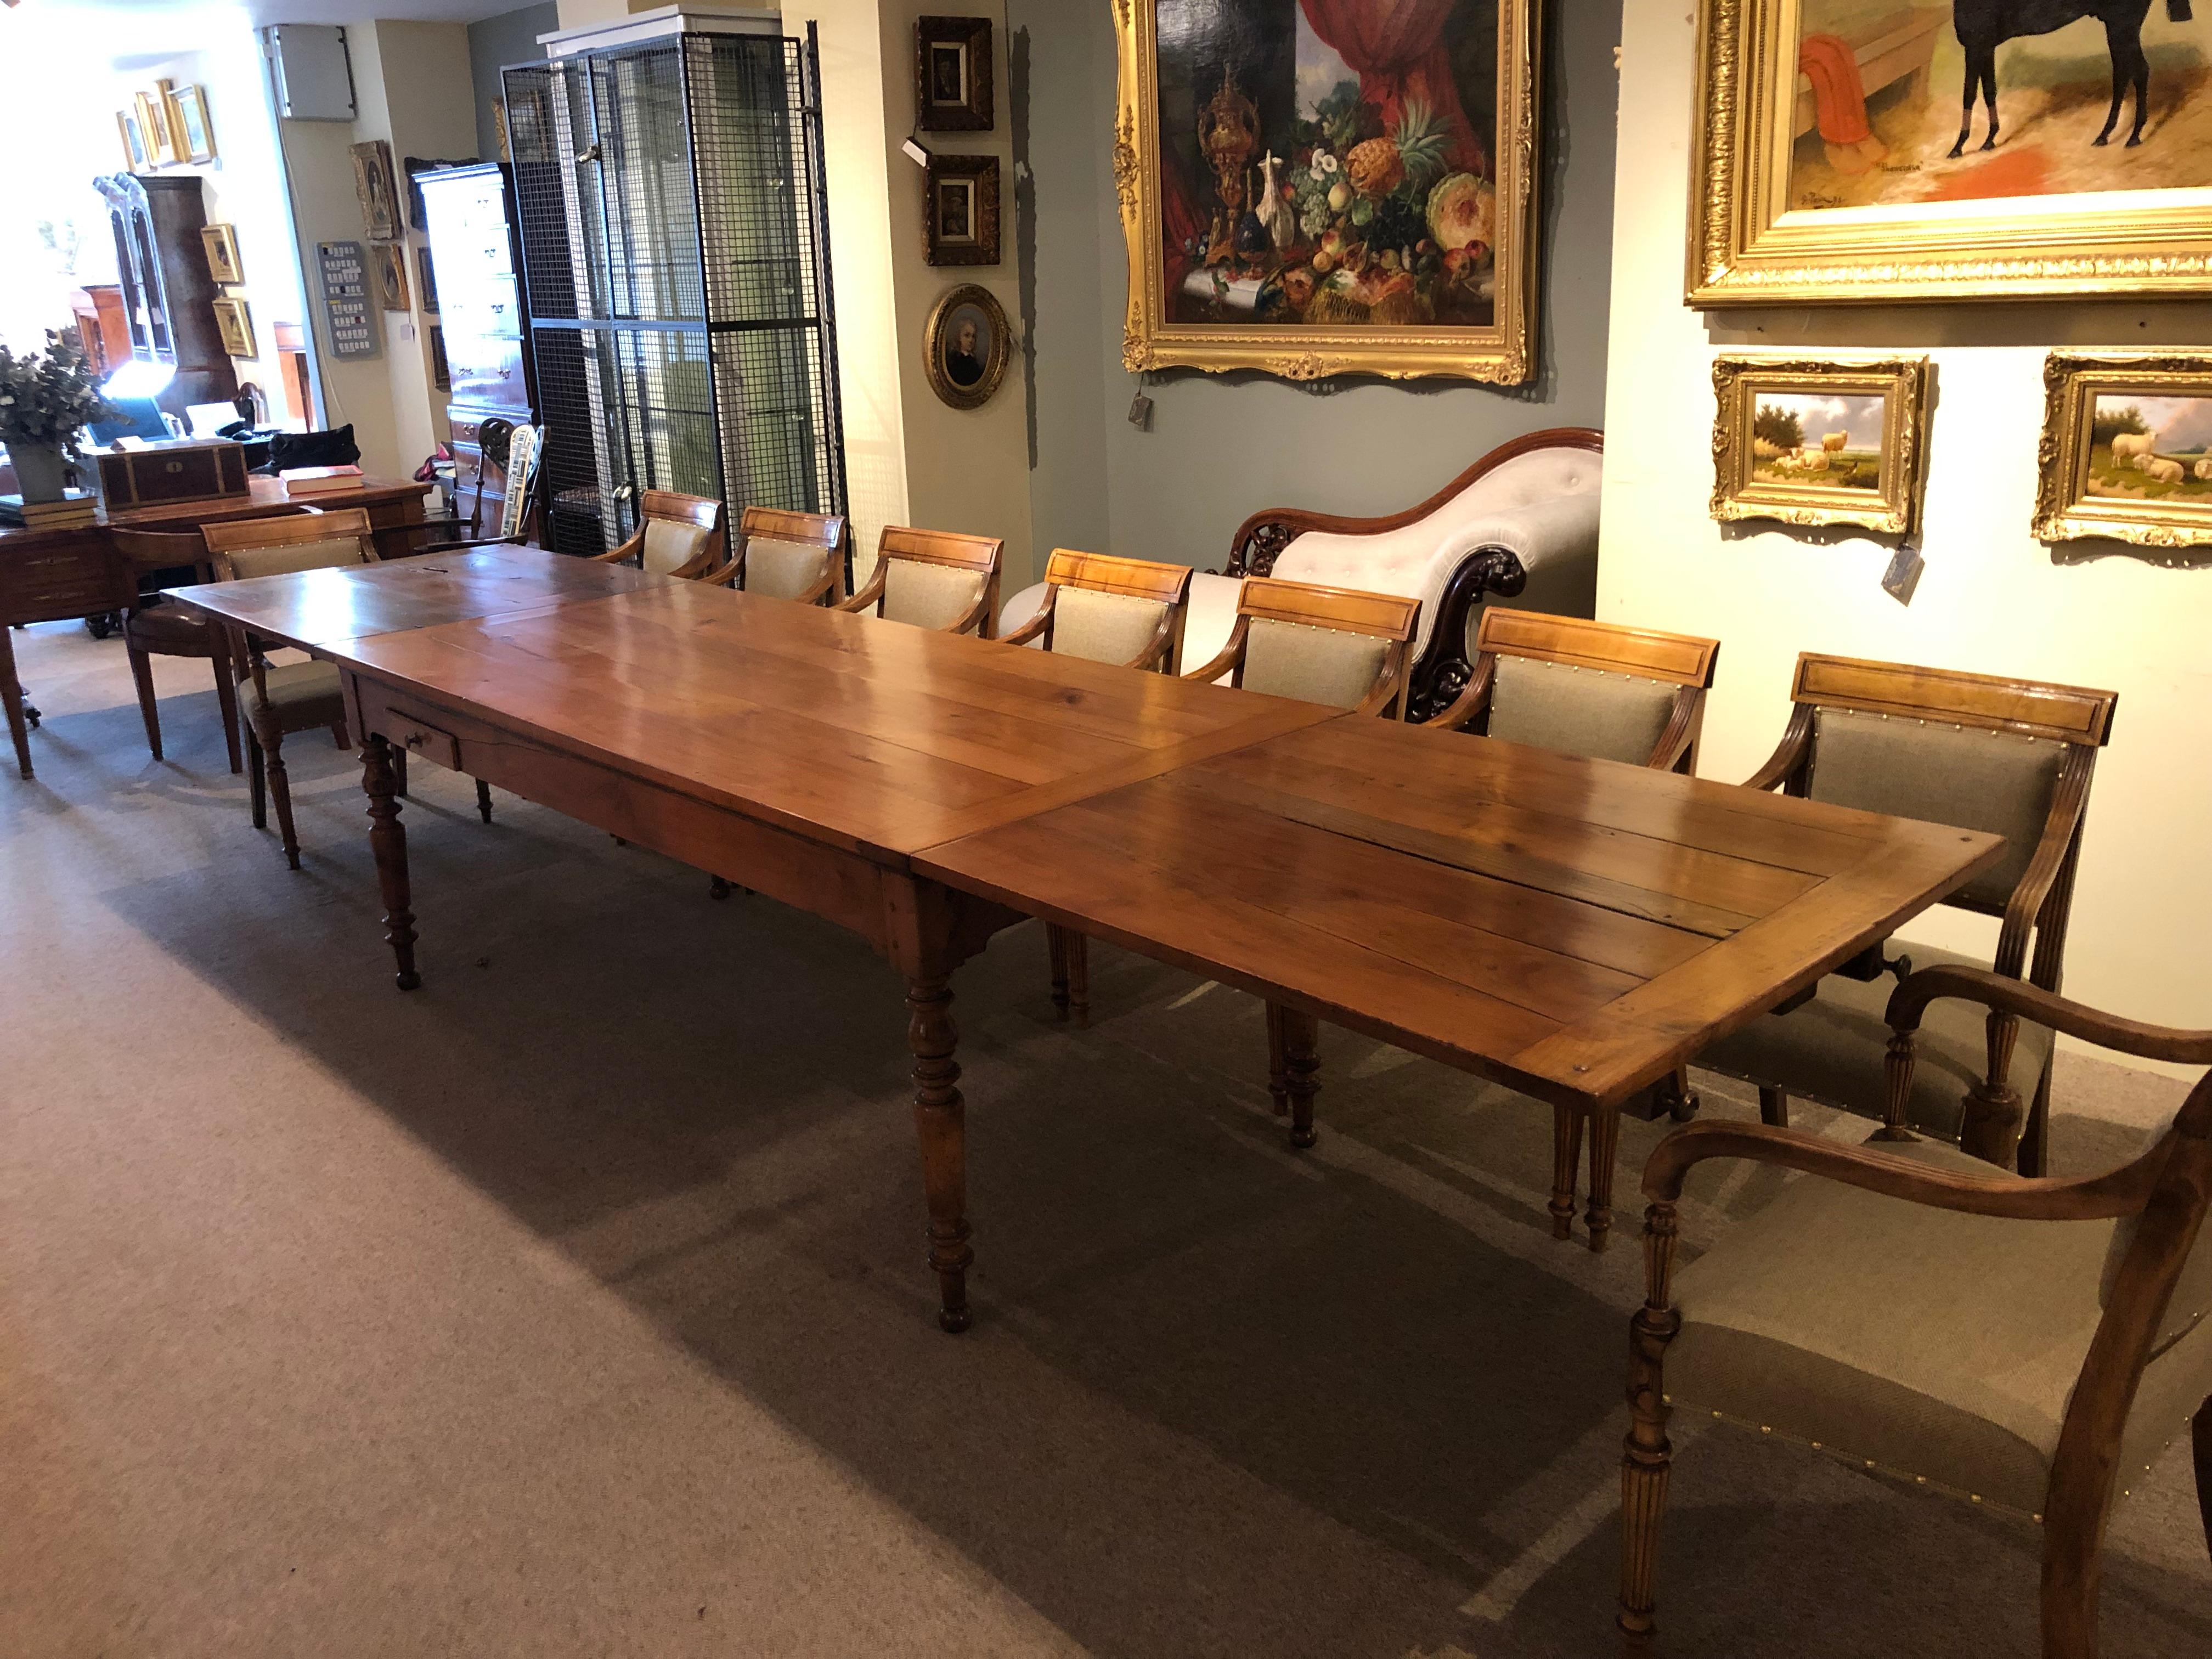 An exceptional quality early 19th century french cherrywood double extending farmhouse dining table with beautifully turned legs typical of the charles x period. This table has been restored to the highest standard. The leaves easily slide out from